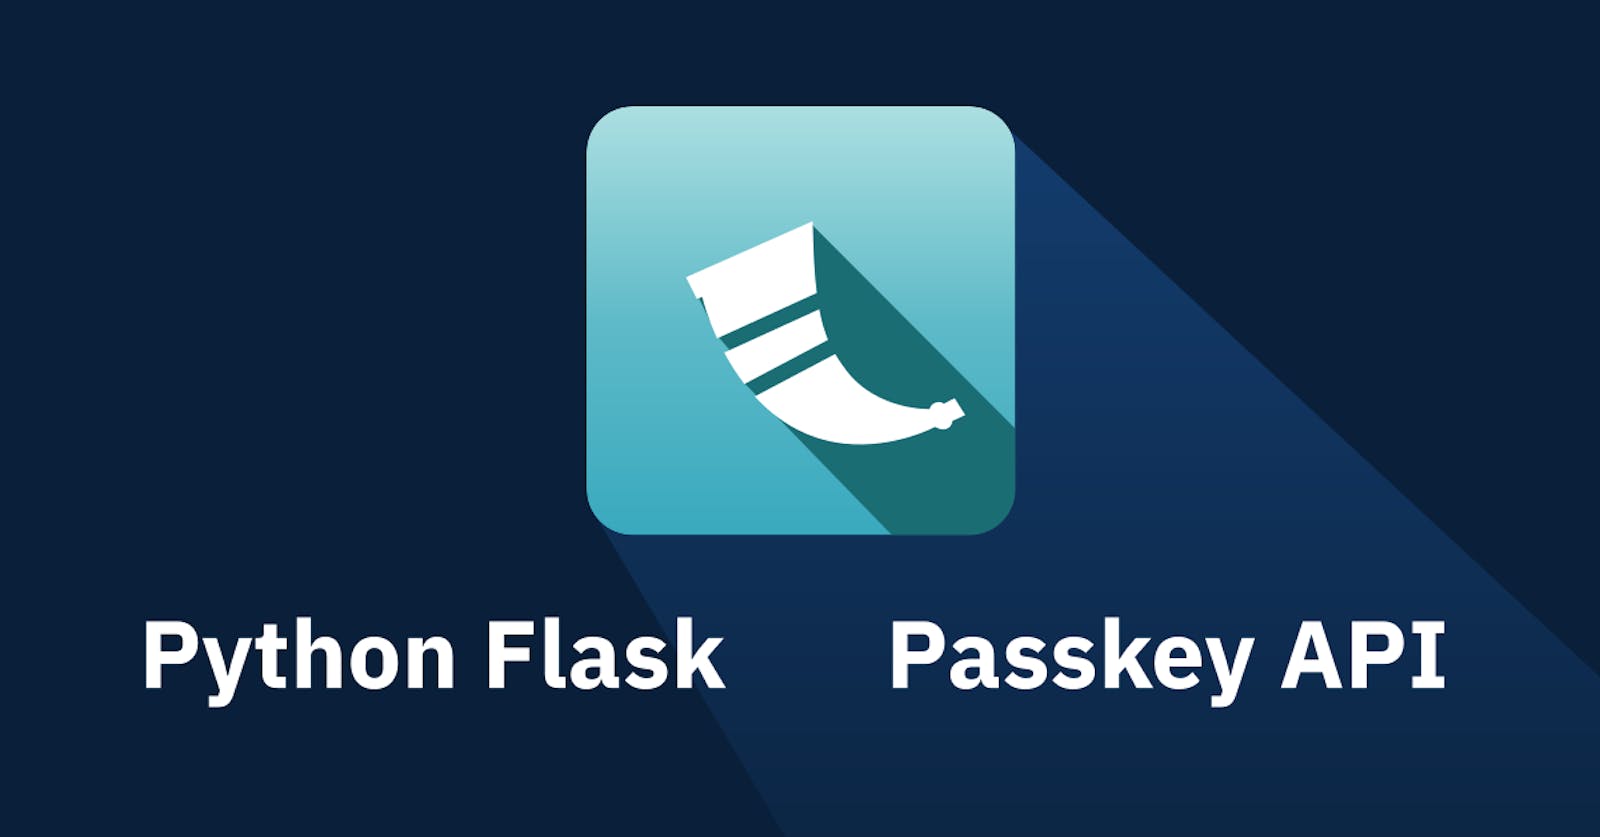 How to add Passkey Login to your Python Flask App